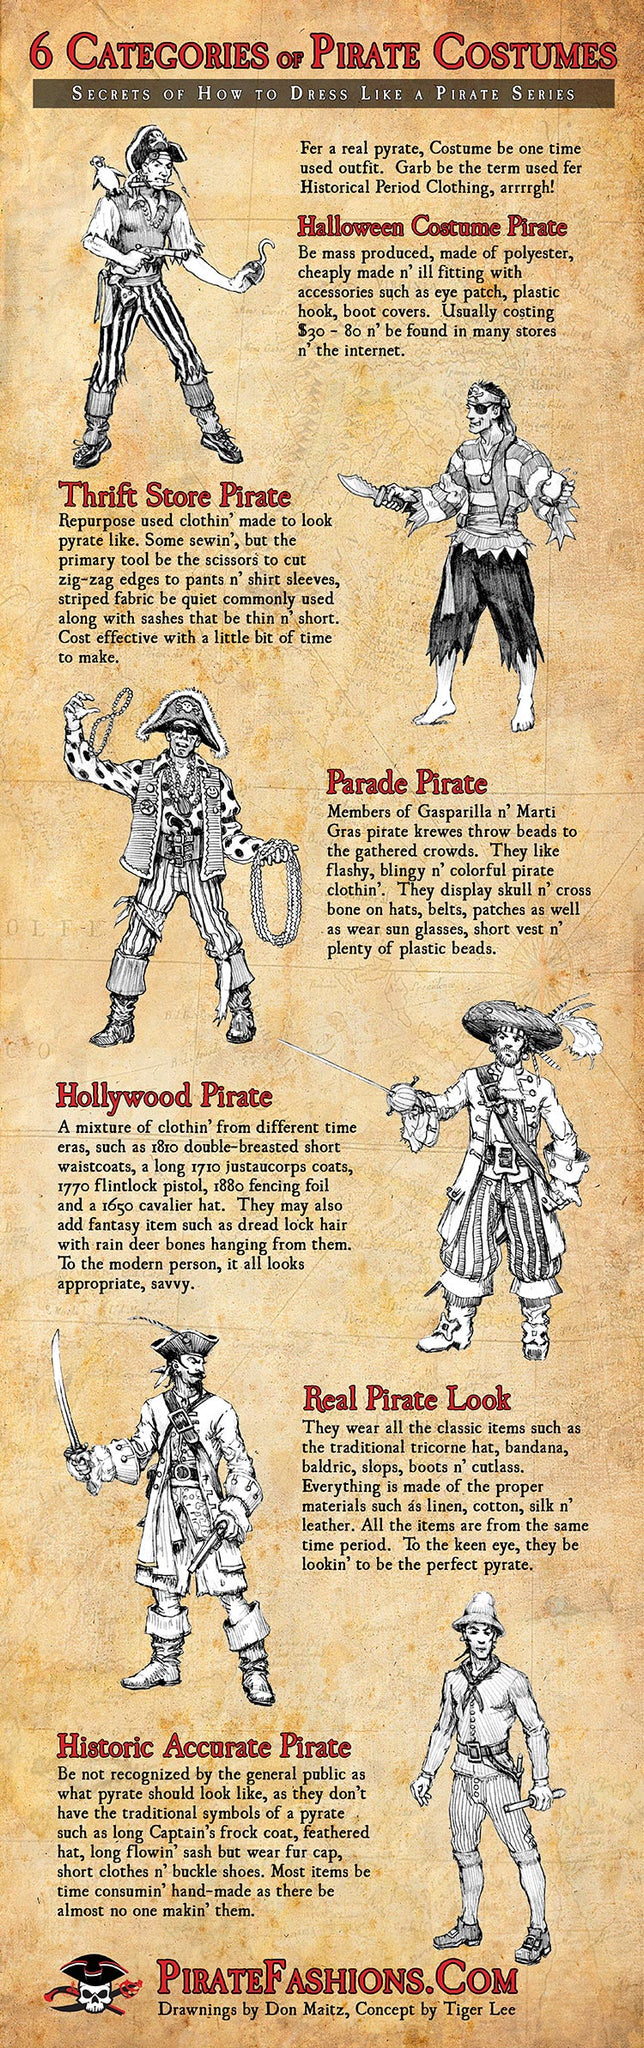 6 Types of Pirate Costumes